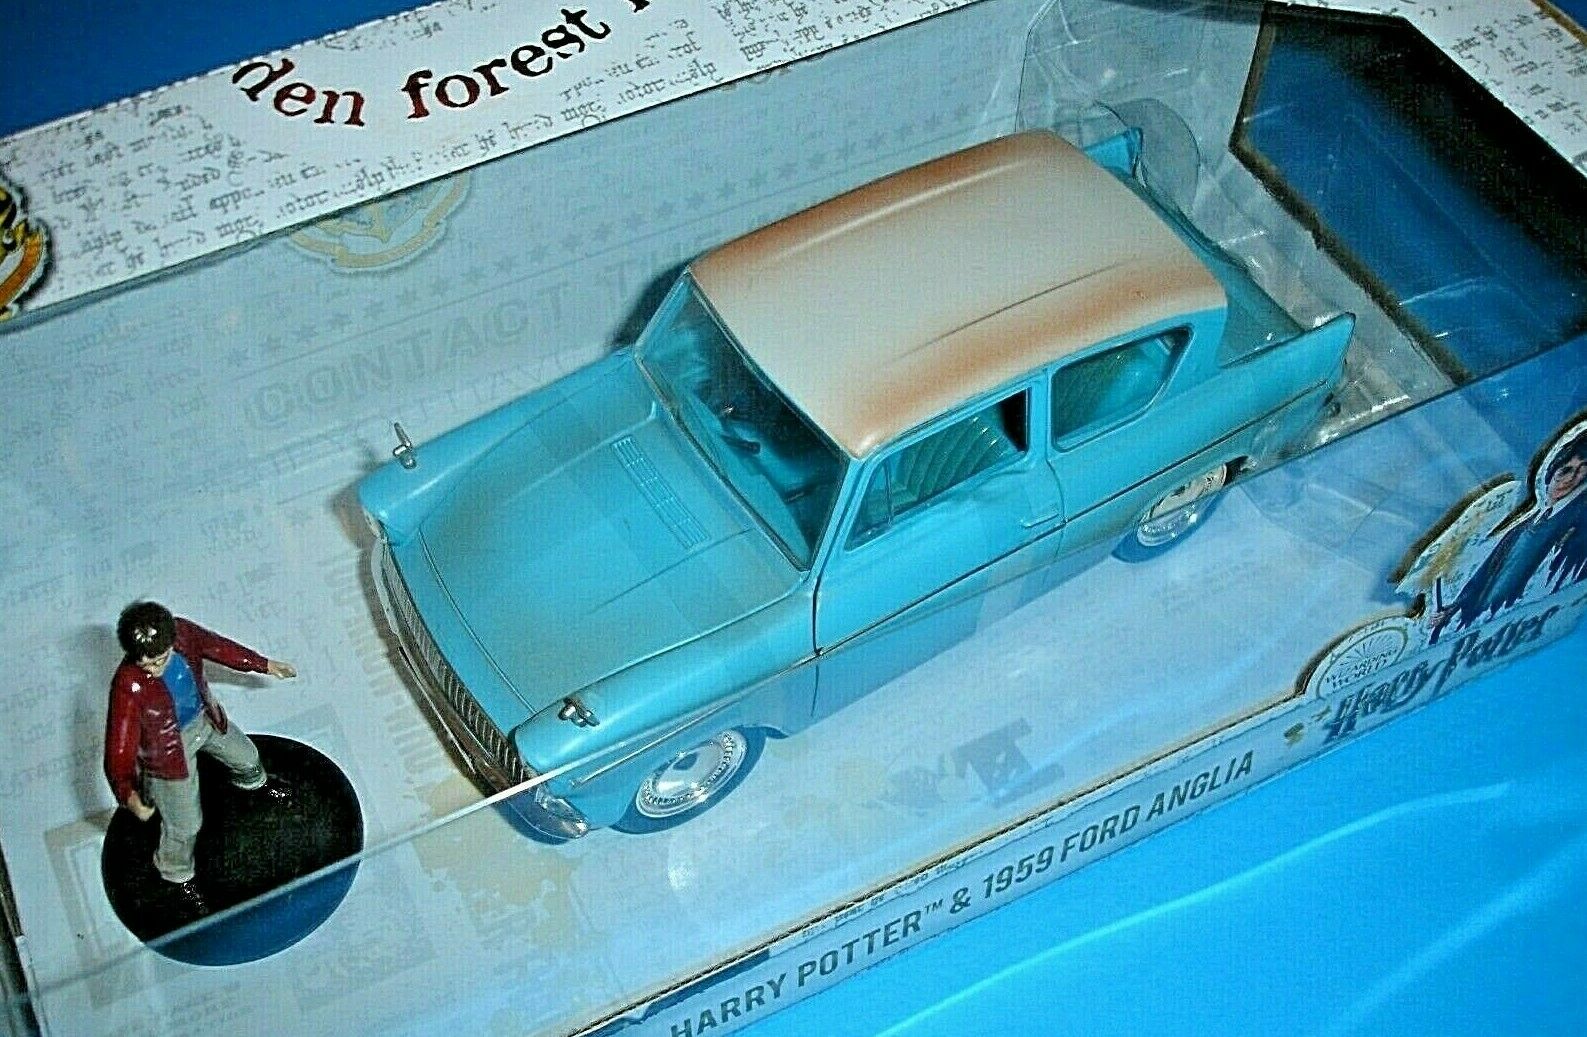 Harry Potter 1:24 Ron Weasley Car 1959 Ford Anglia G Scale Goes With Lgb Train